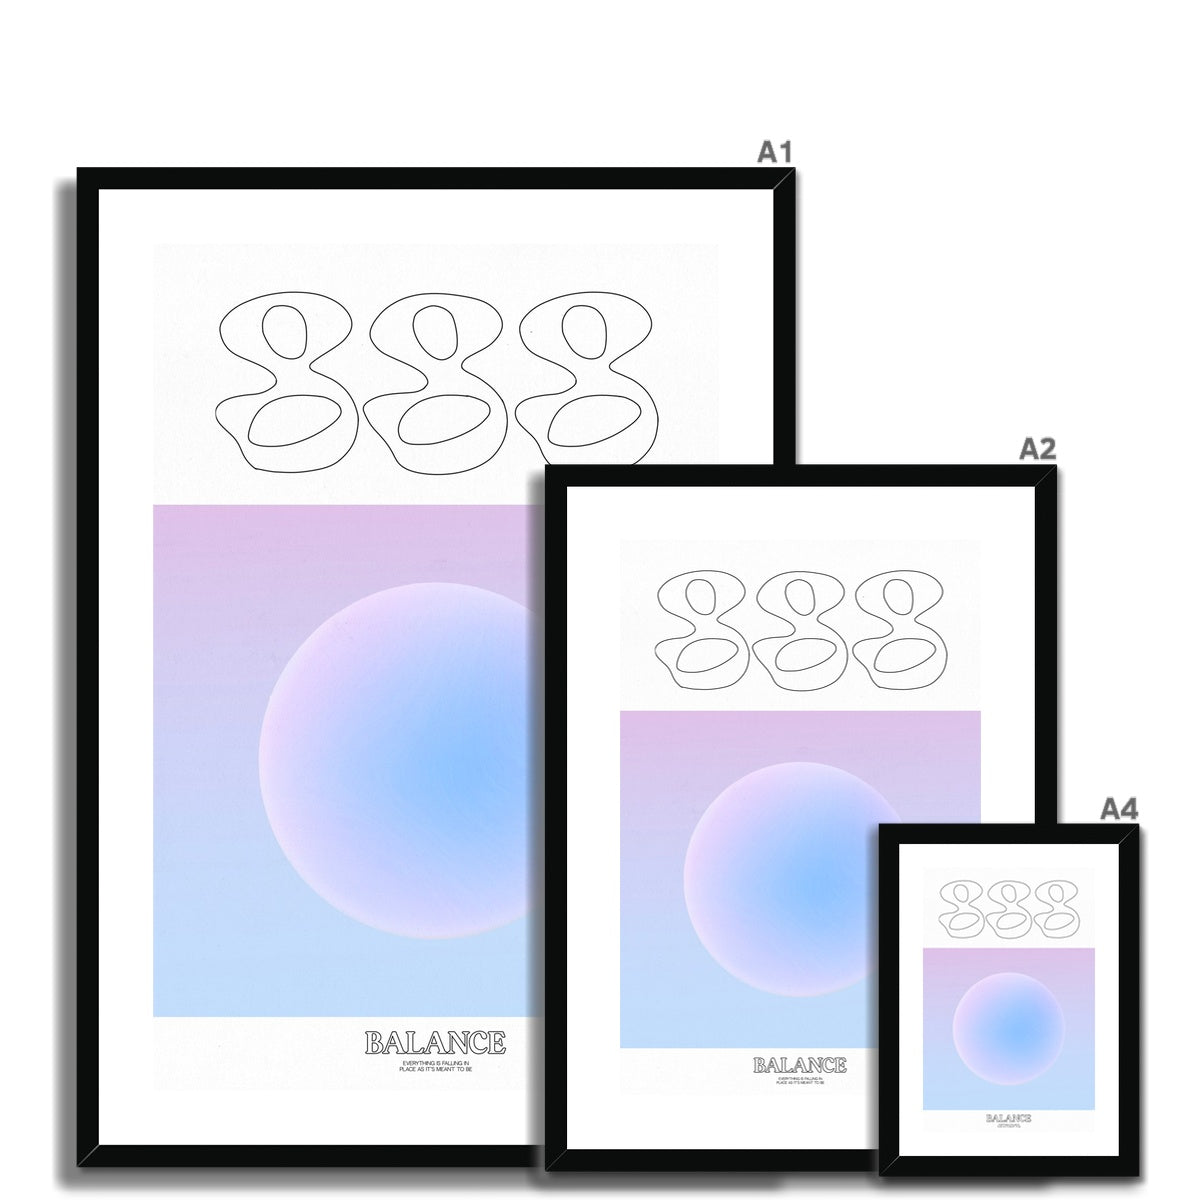 An angel number art print with a gradient aura. Add a touch of angel energy to your walls with a angel number auras. The perfect wall art posters to create a soft and dreamy aesthetic with your apartment or dorm decor. 888 Balance: Everything Is Falling Into Place As It’s Meant To Be.